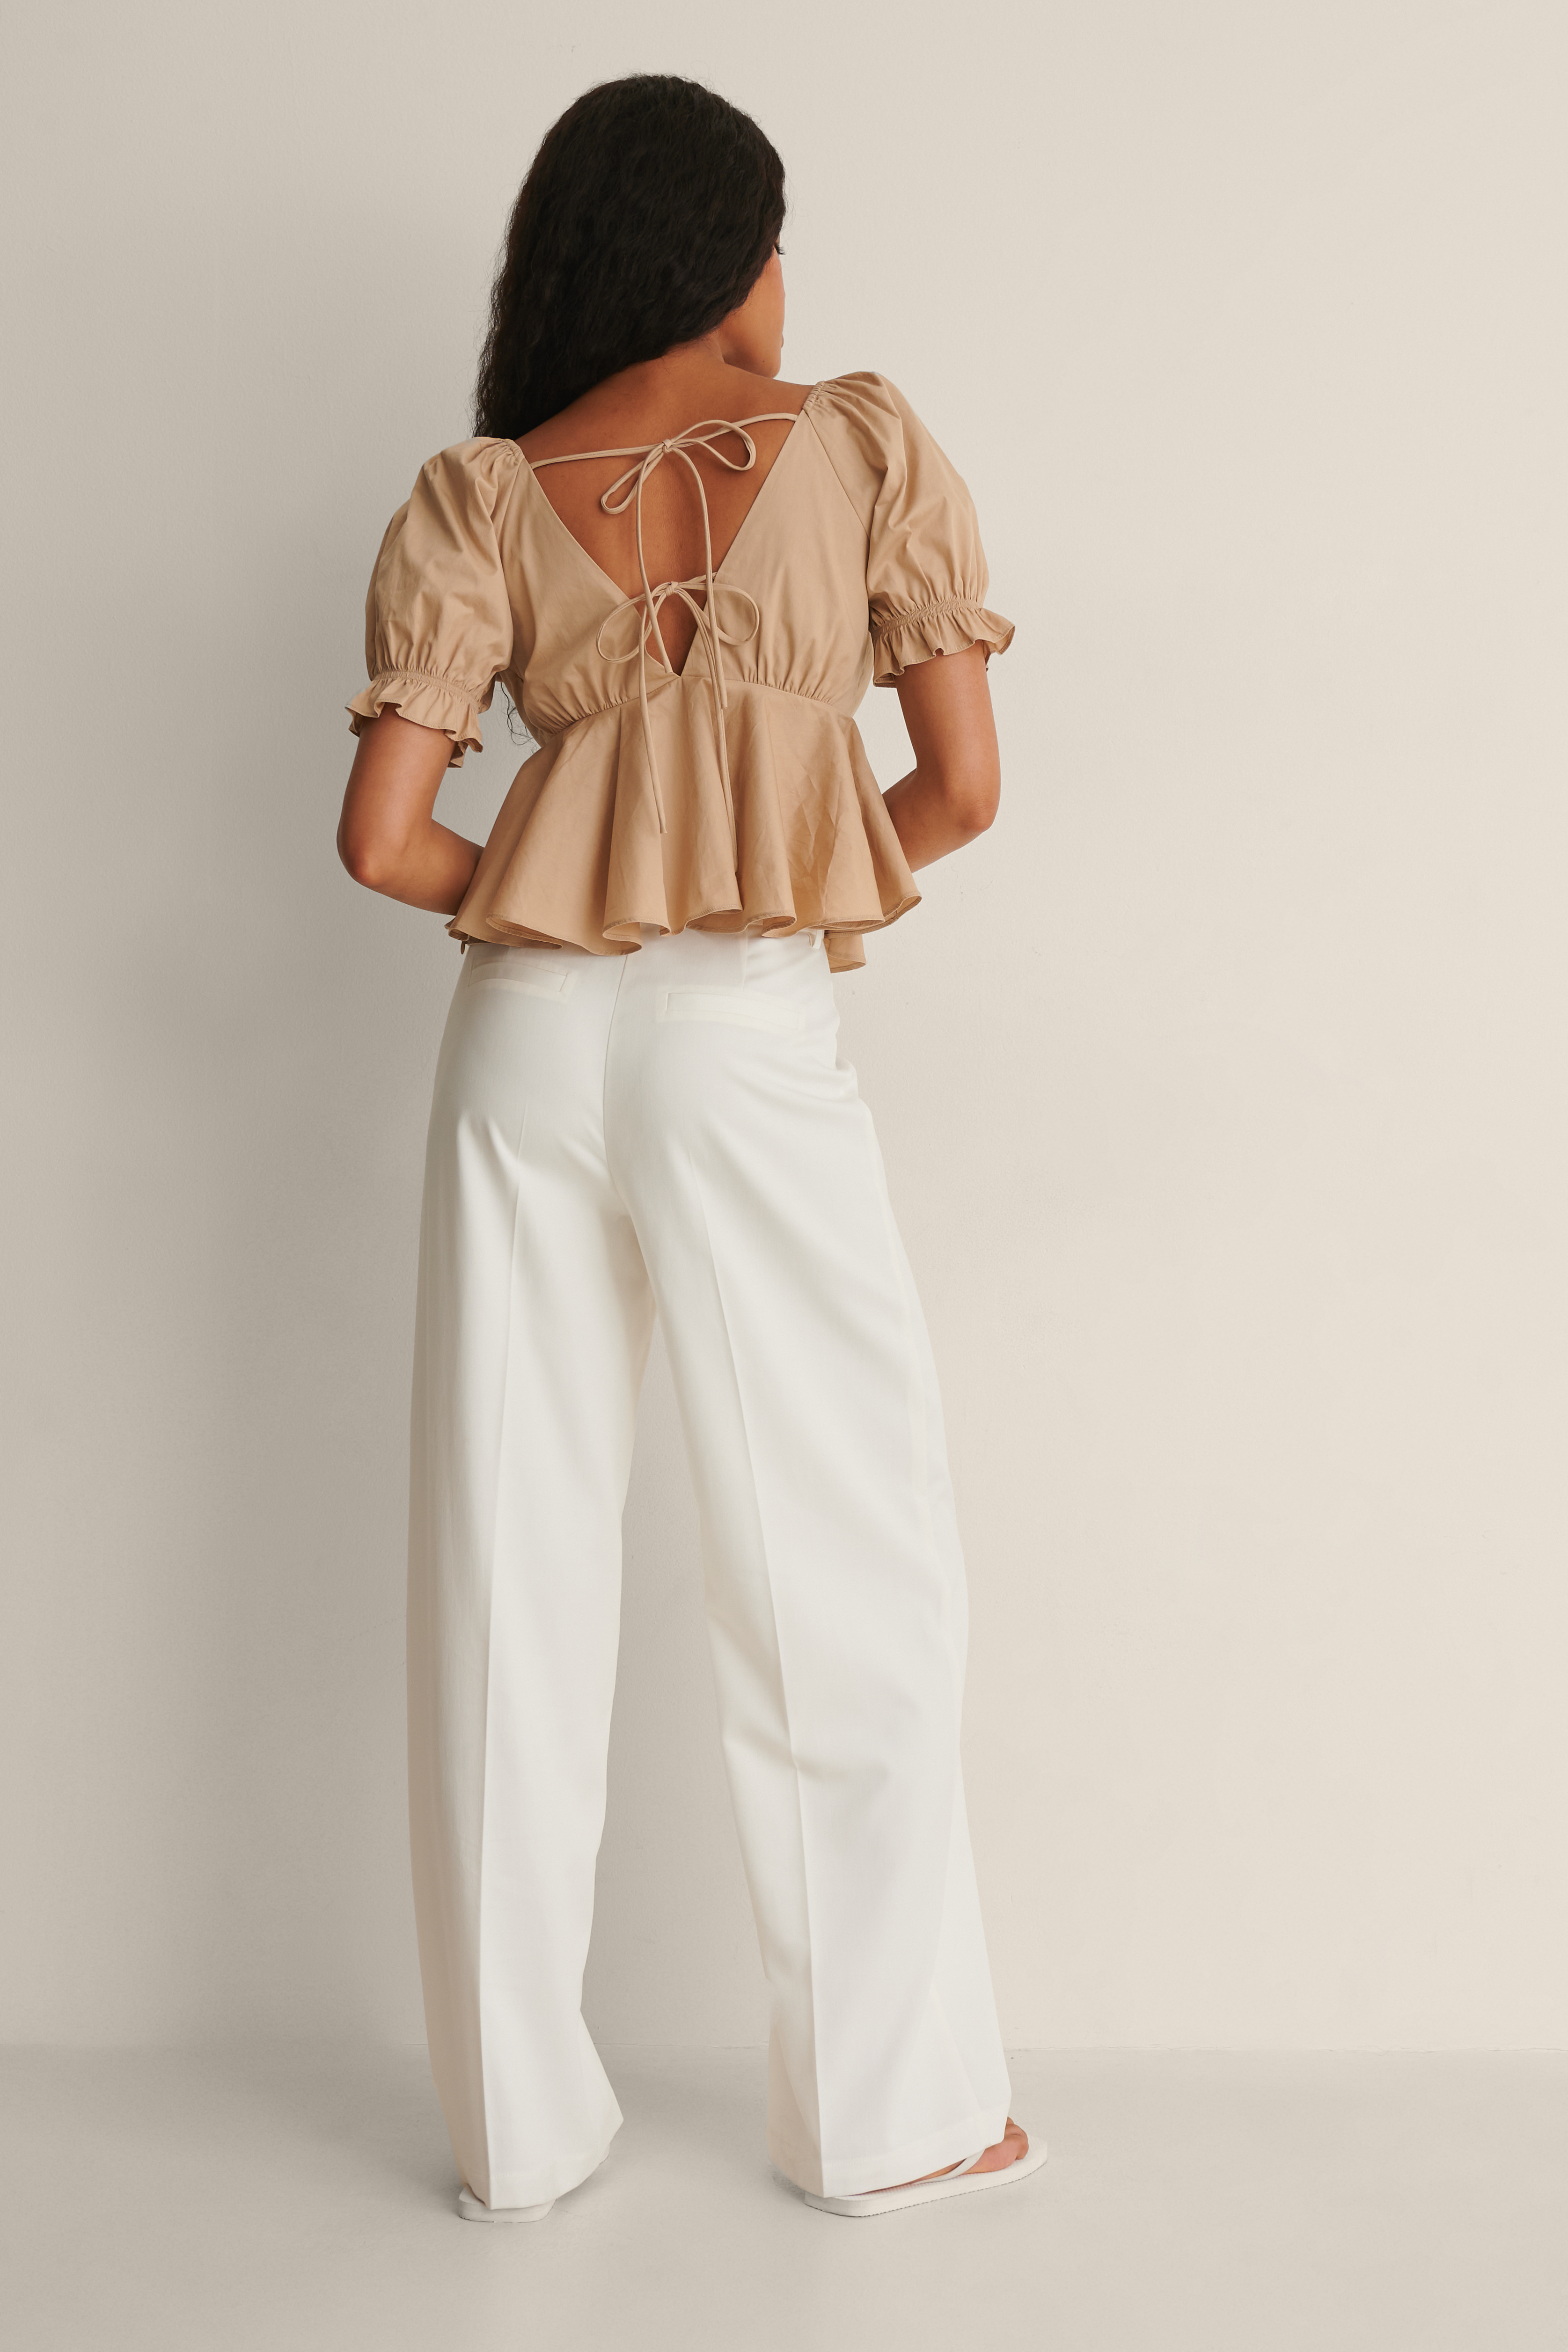 Tie Back Short Sleeve Top Outfit.